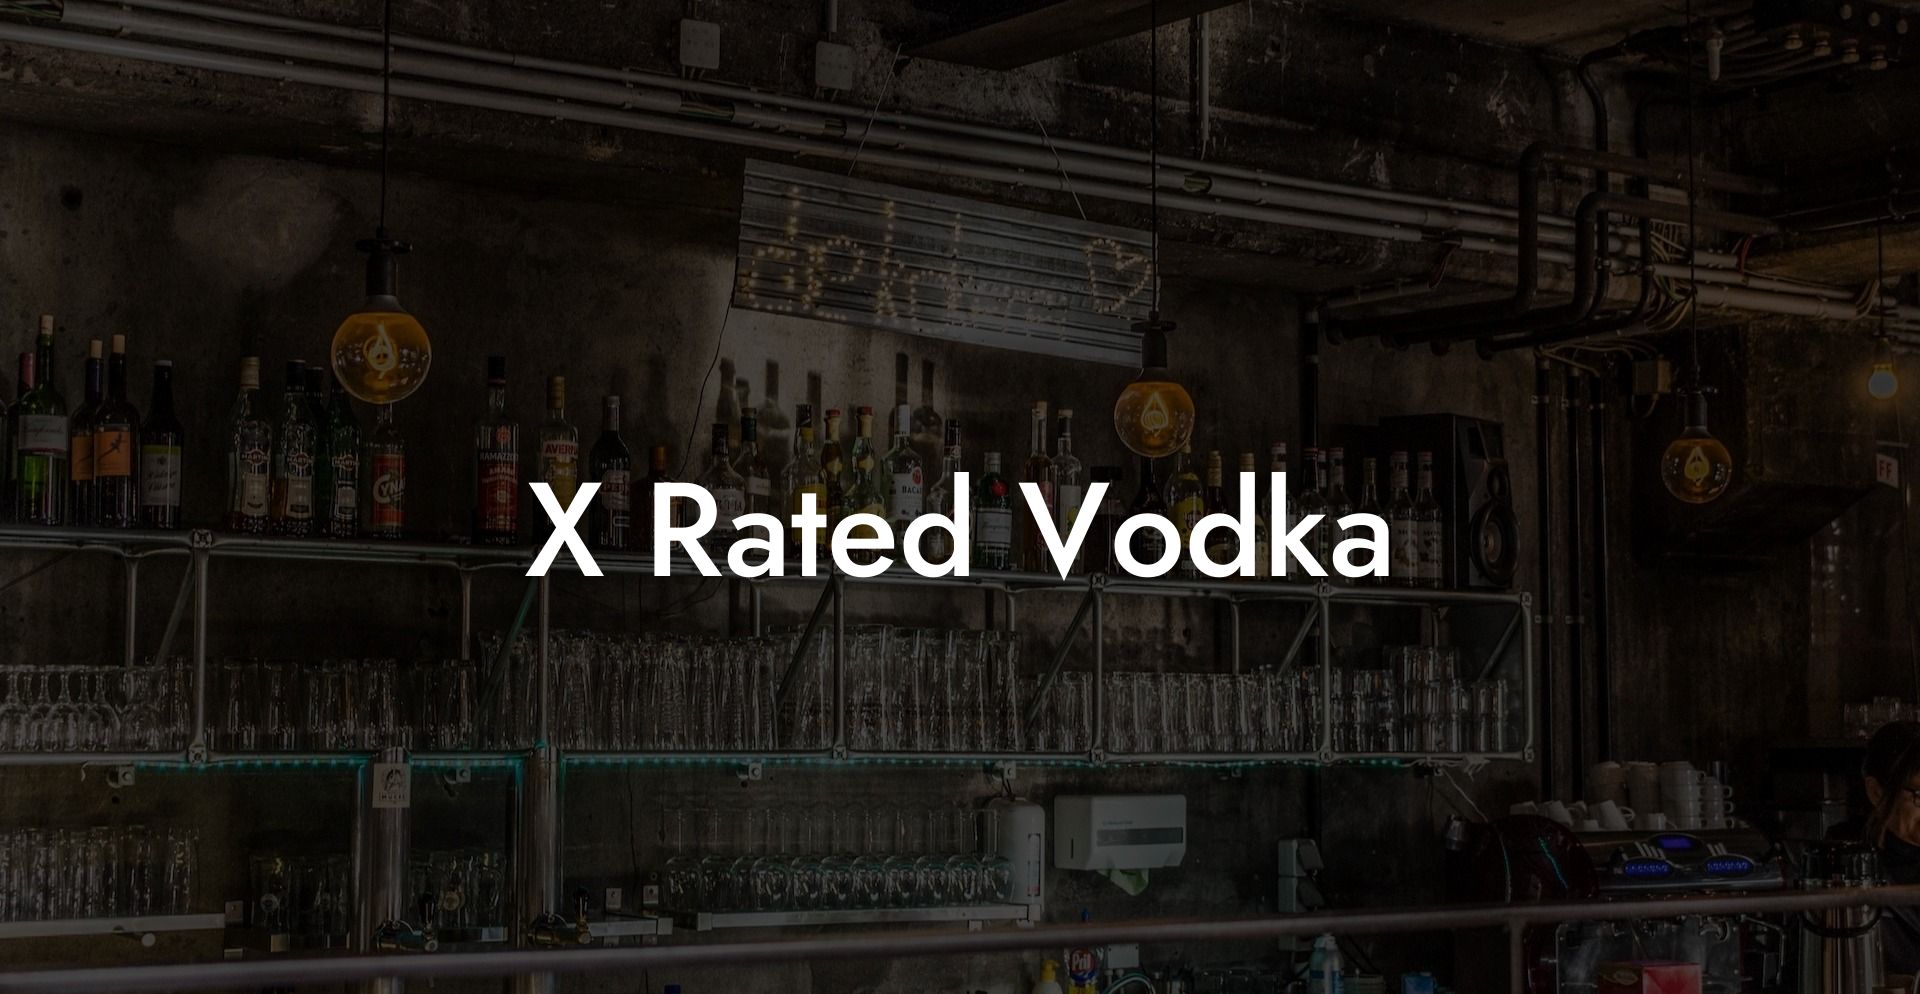 X Rated Vodka